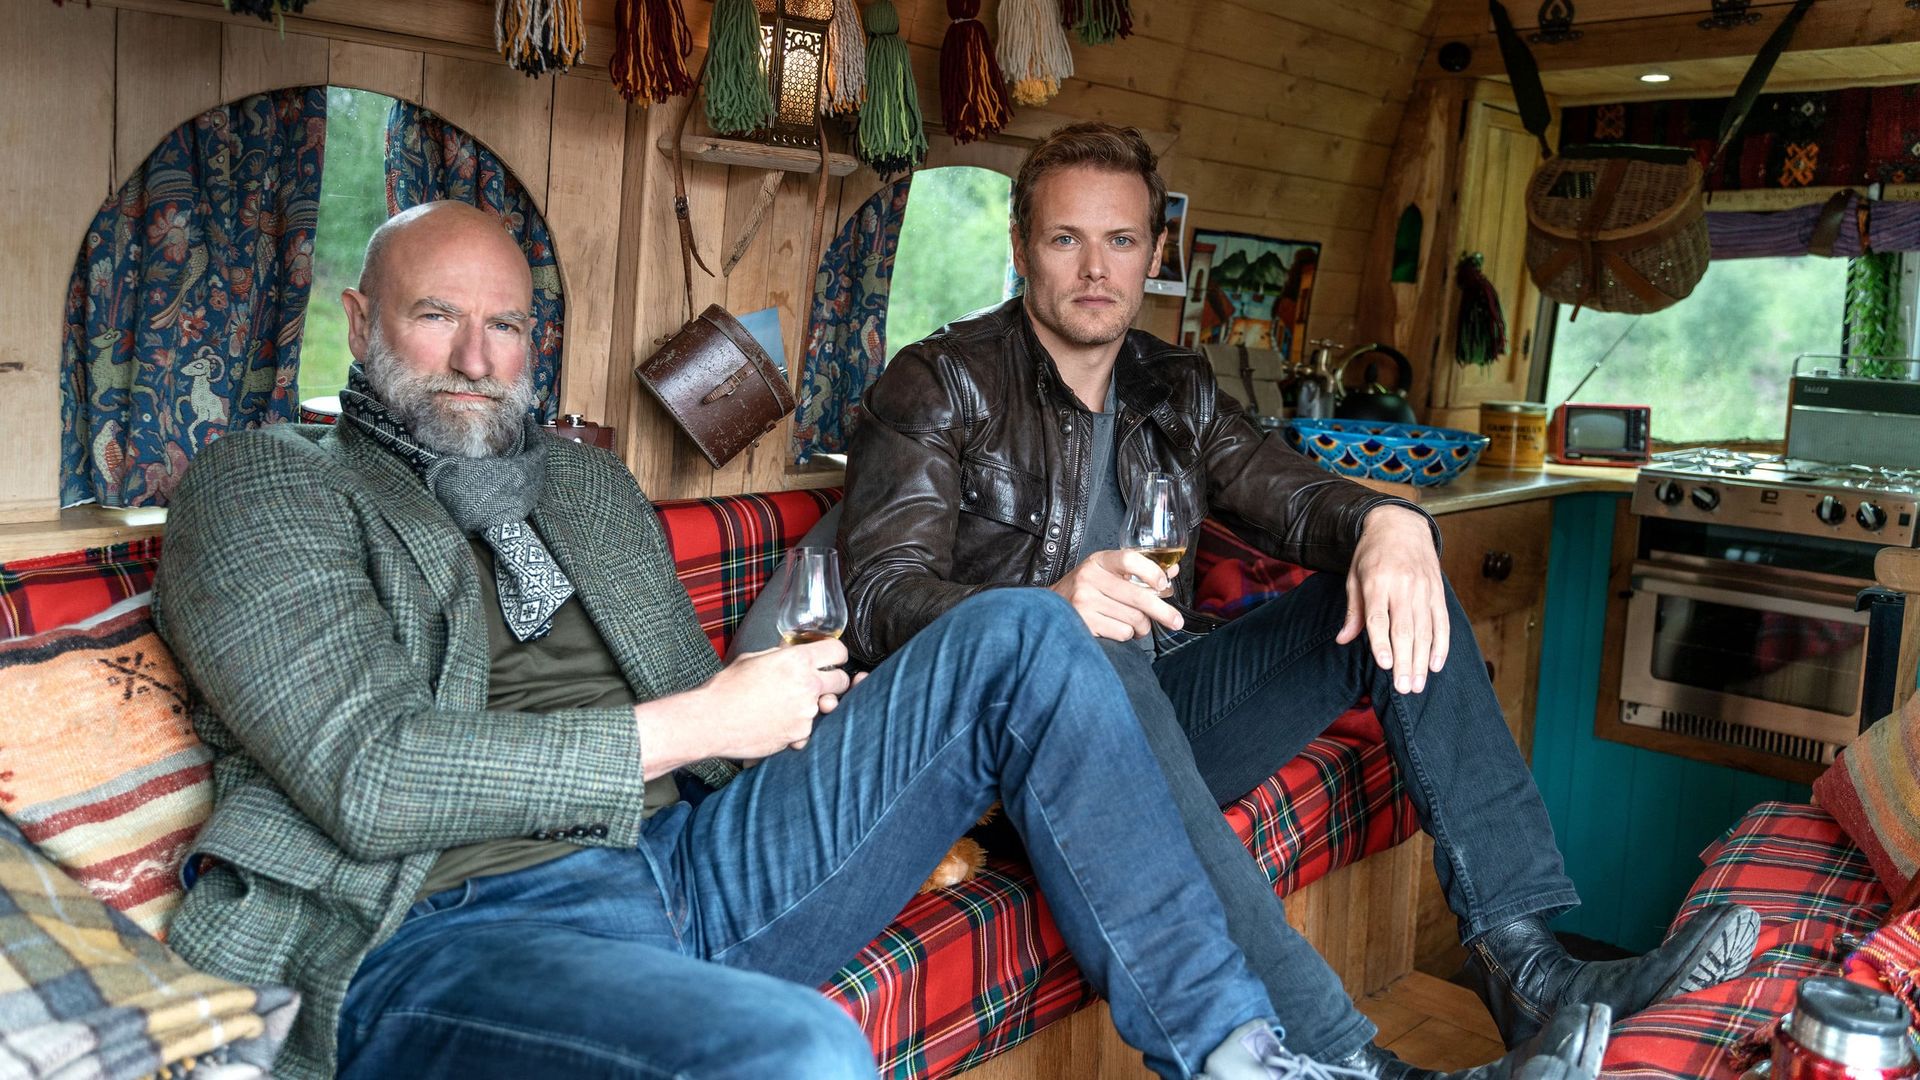 Men in Kilts: A Roadtrip with Sam and Graham background